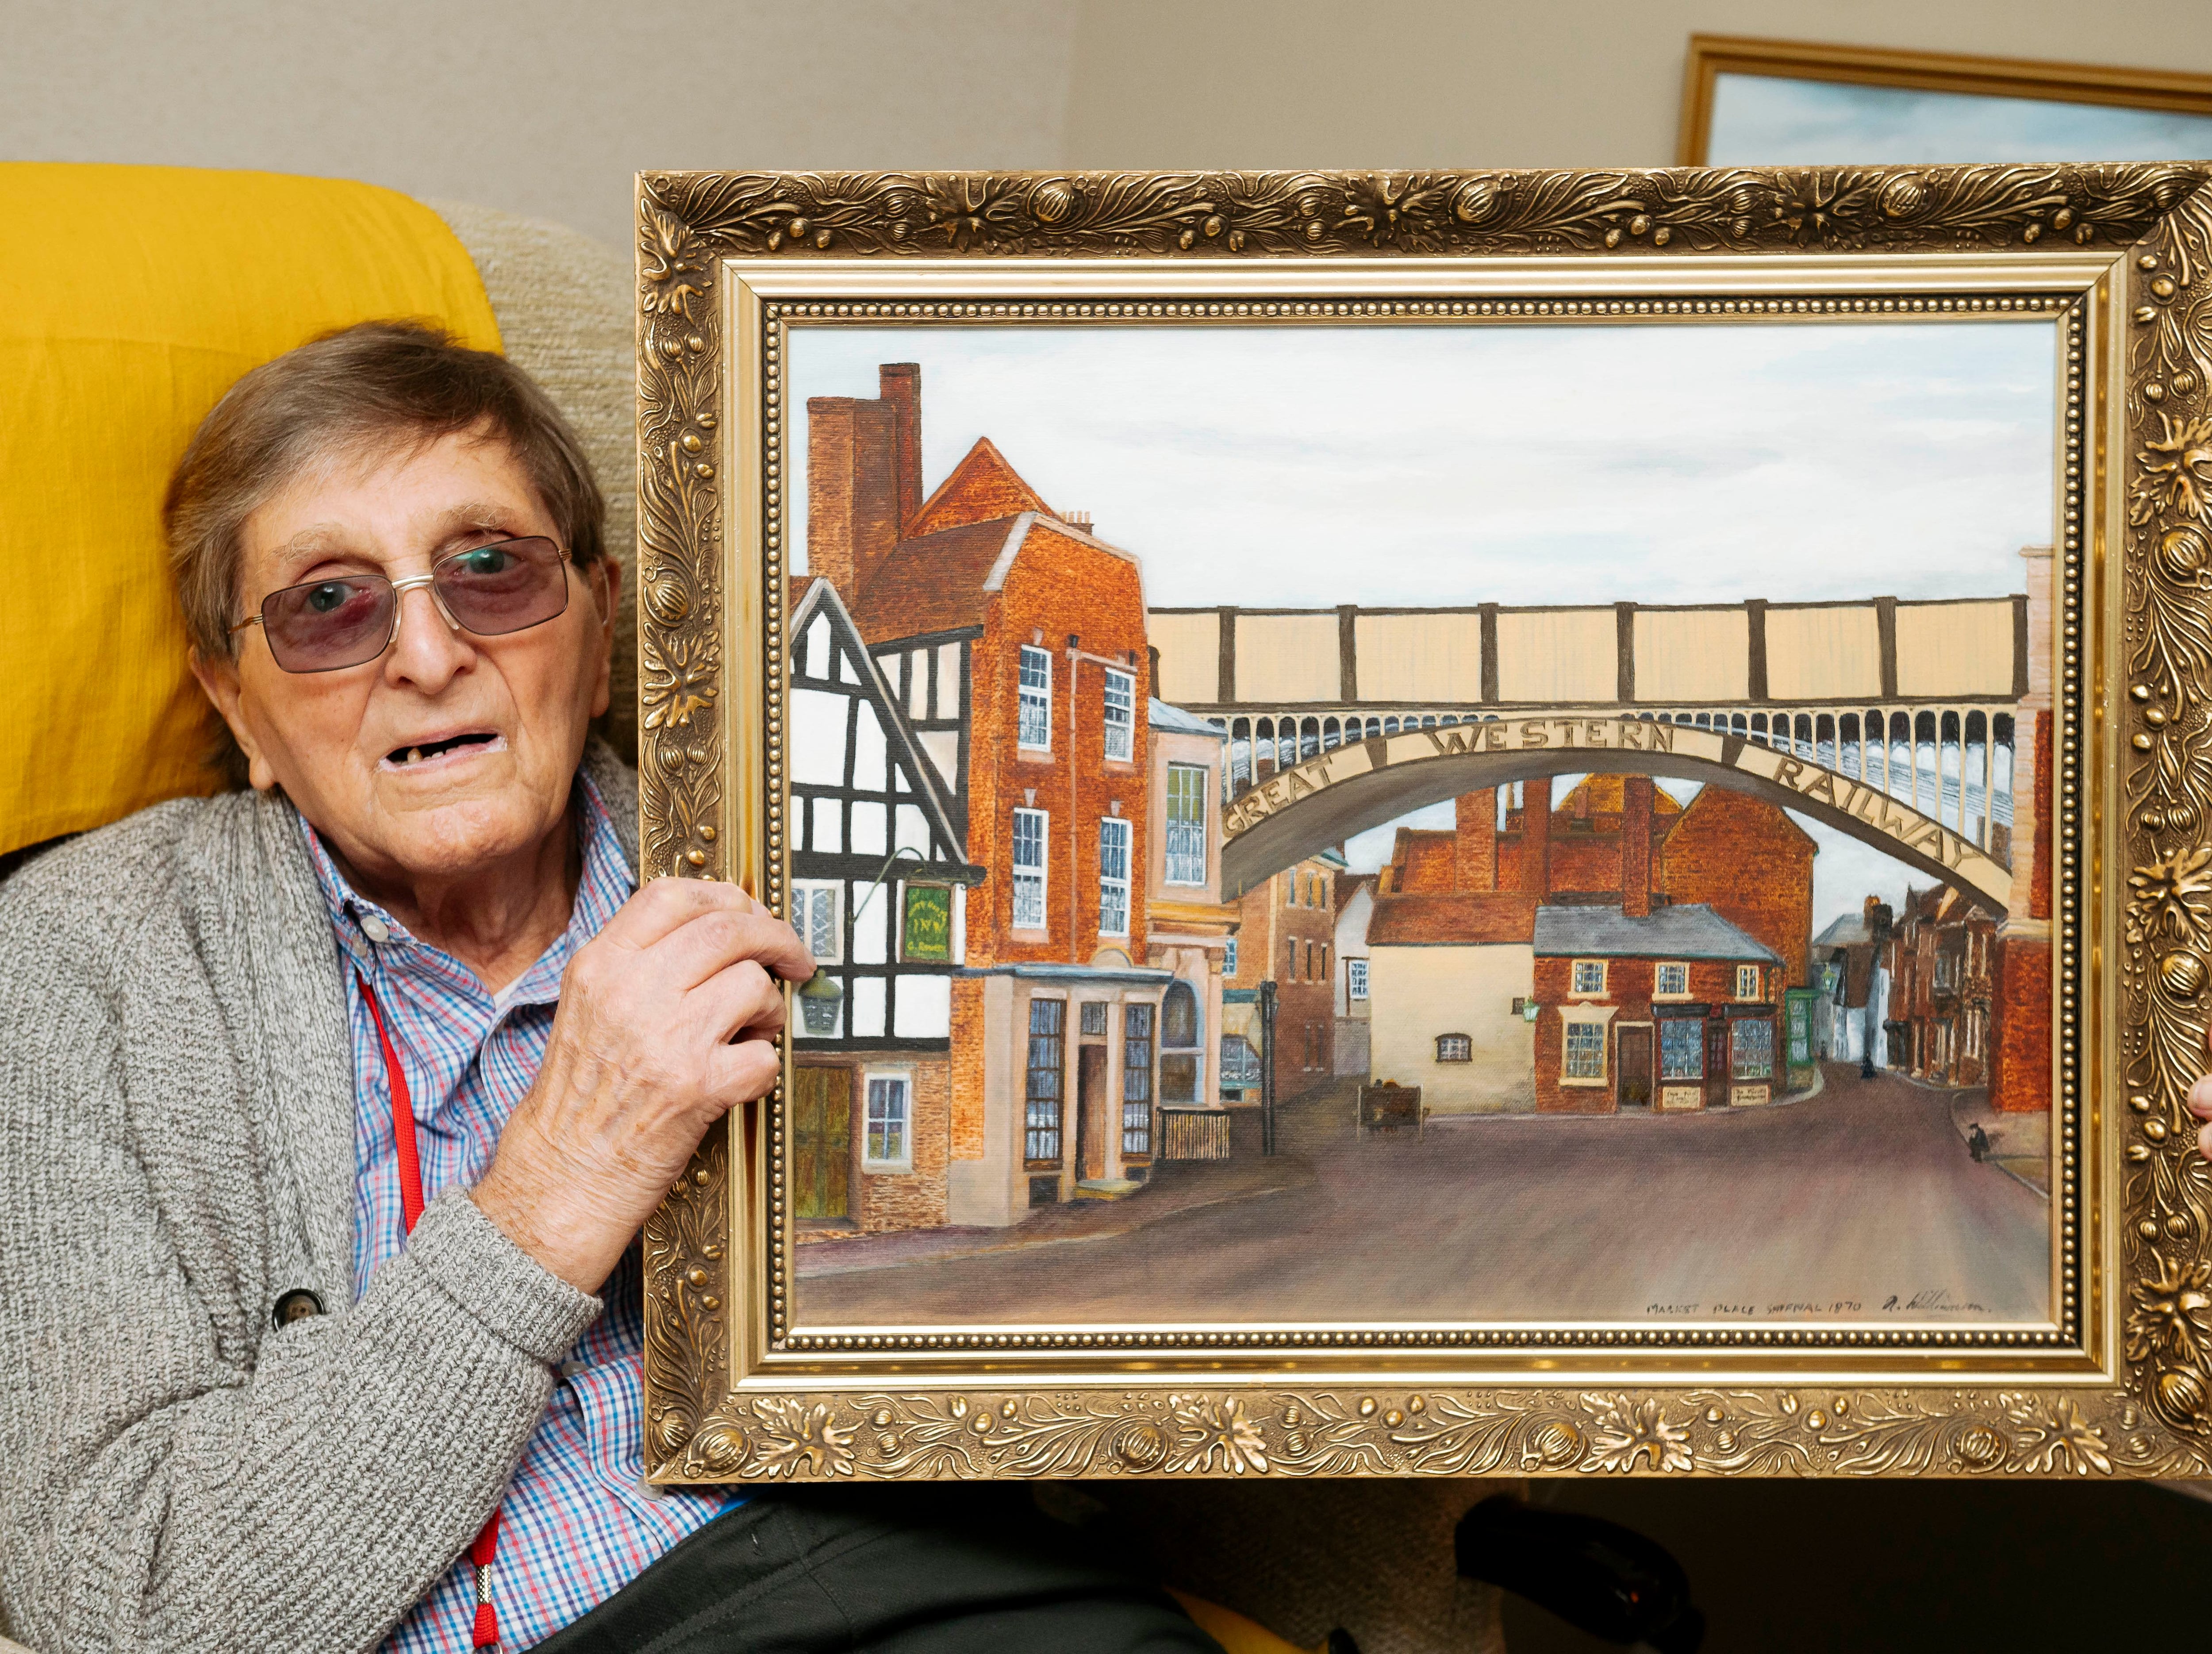 Take a look at this 91-year-old's extraordinary paintings as he keeps going from his care home